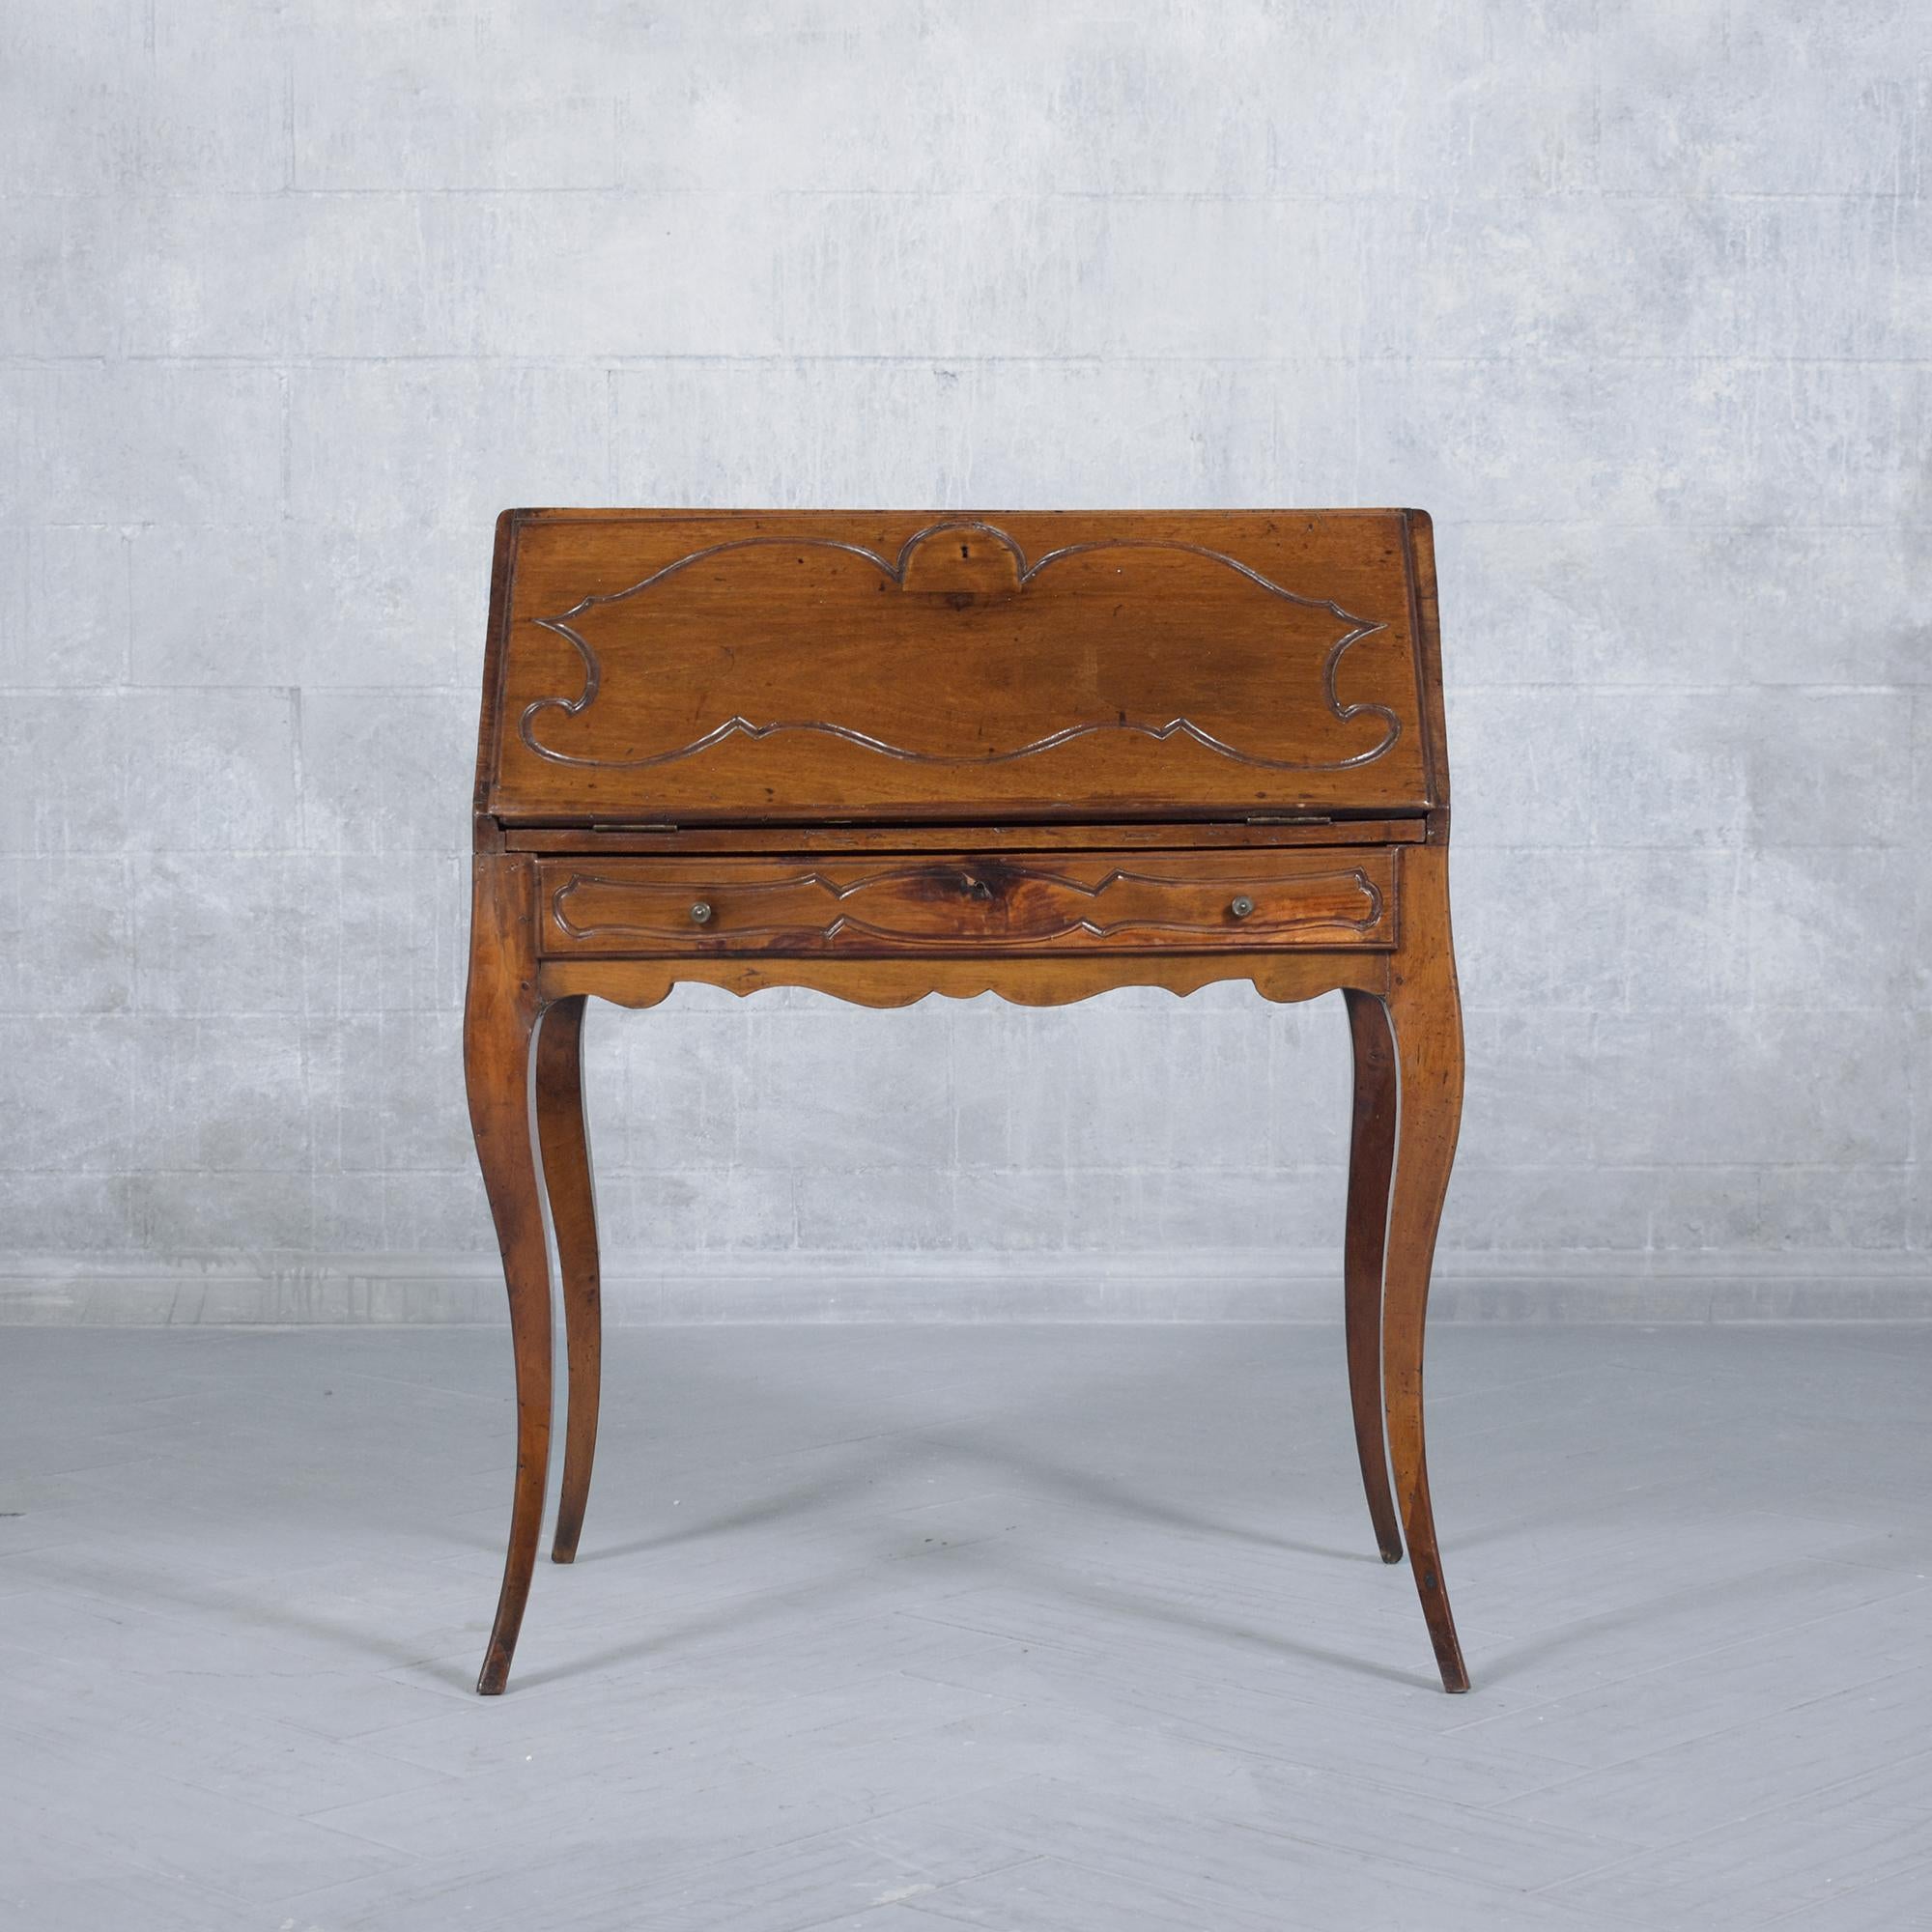 Step back in time with our exquisitely restored French Antique Secrétaire, a genuine late 18th-century gem. Expertly crafted from premium walnut wood, this piece is a shining example of historical elegance and fine craftsmanship. The beauty of this